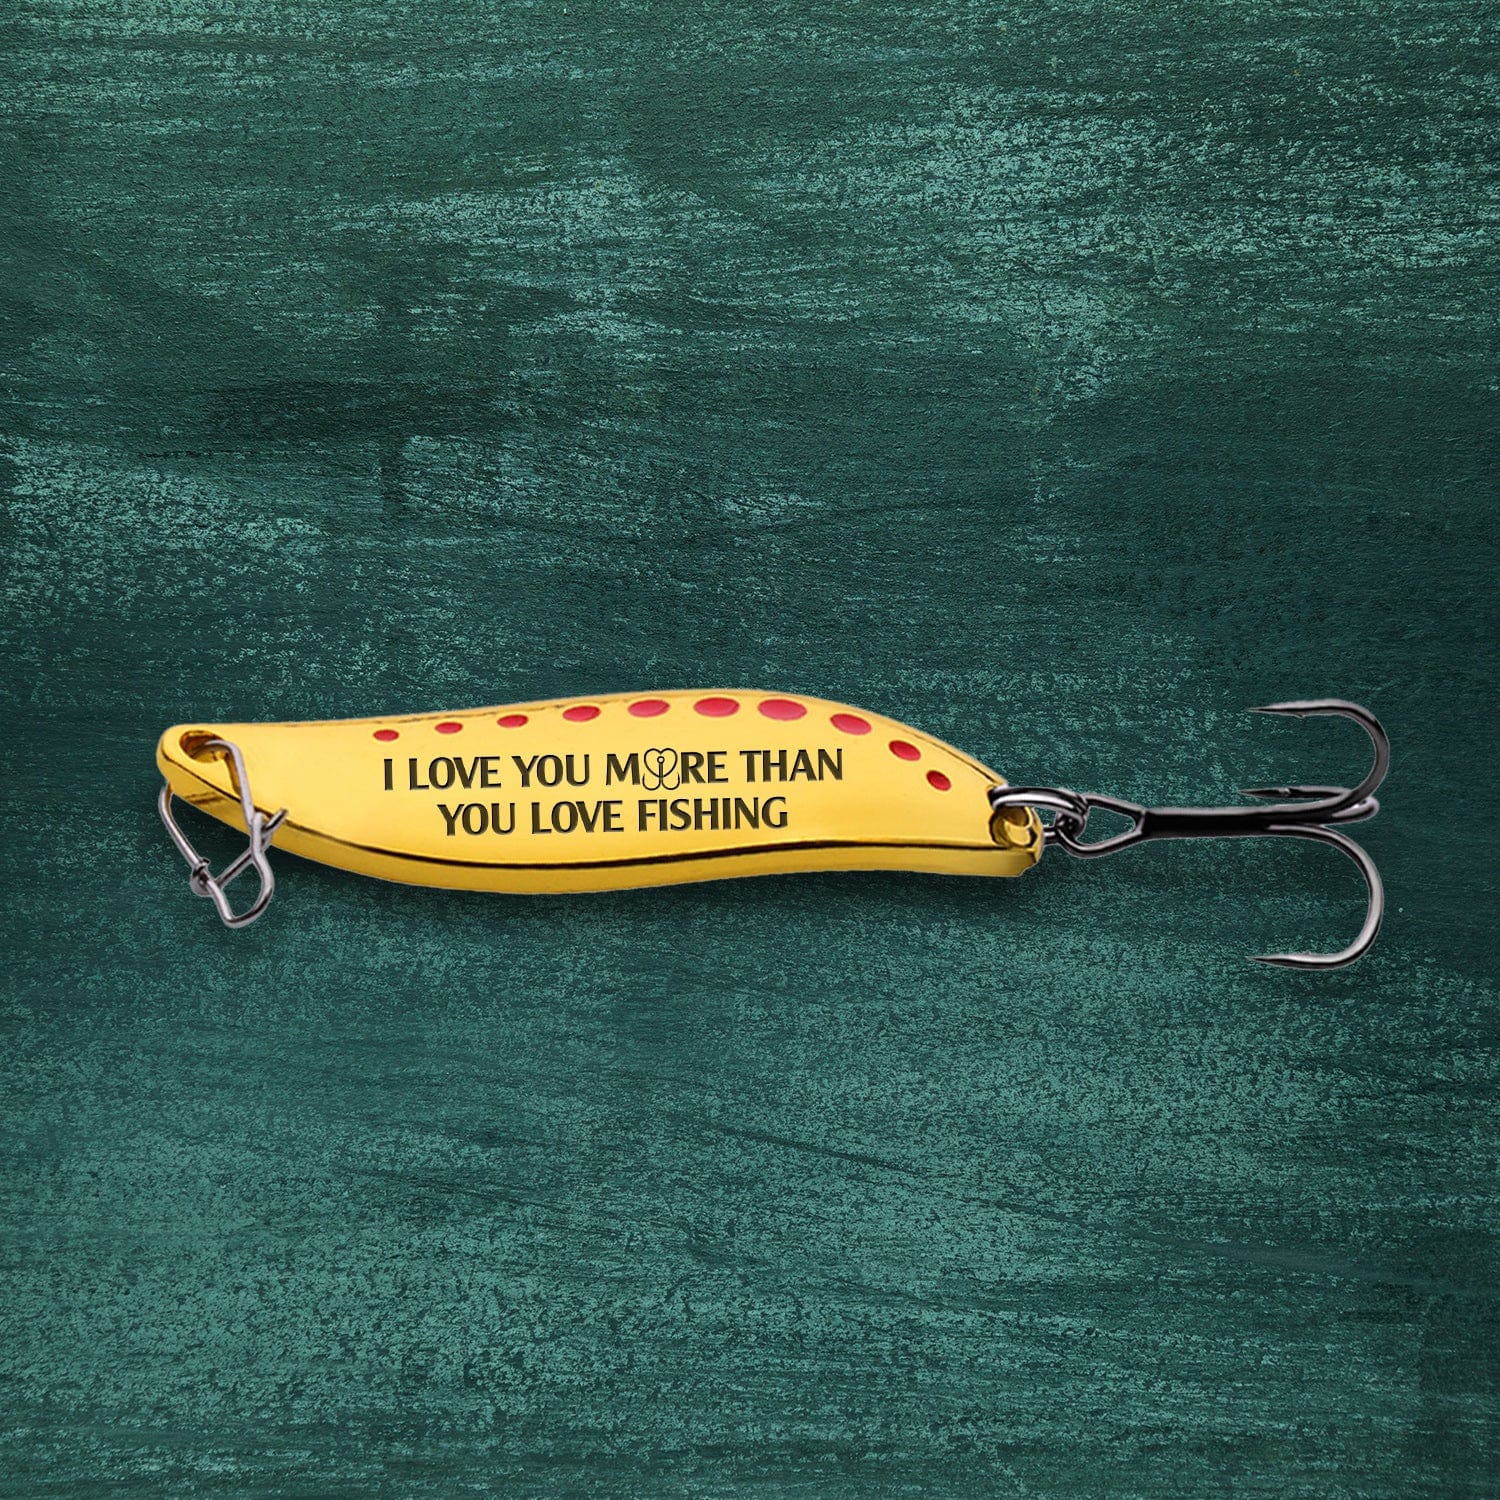 Hooked on You Fishing Keychain, Personalized Fishing Lure Keychain